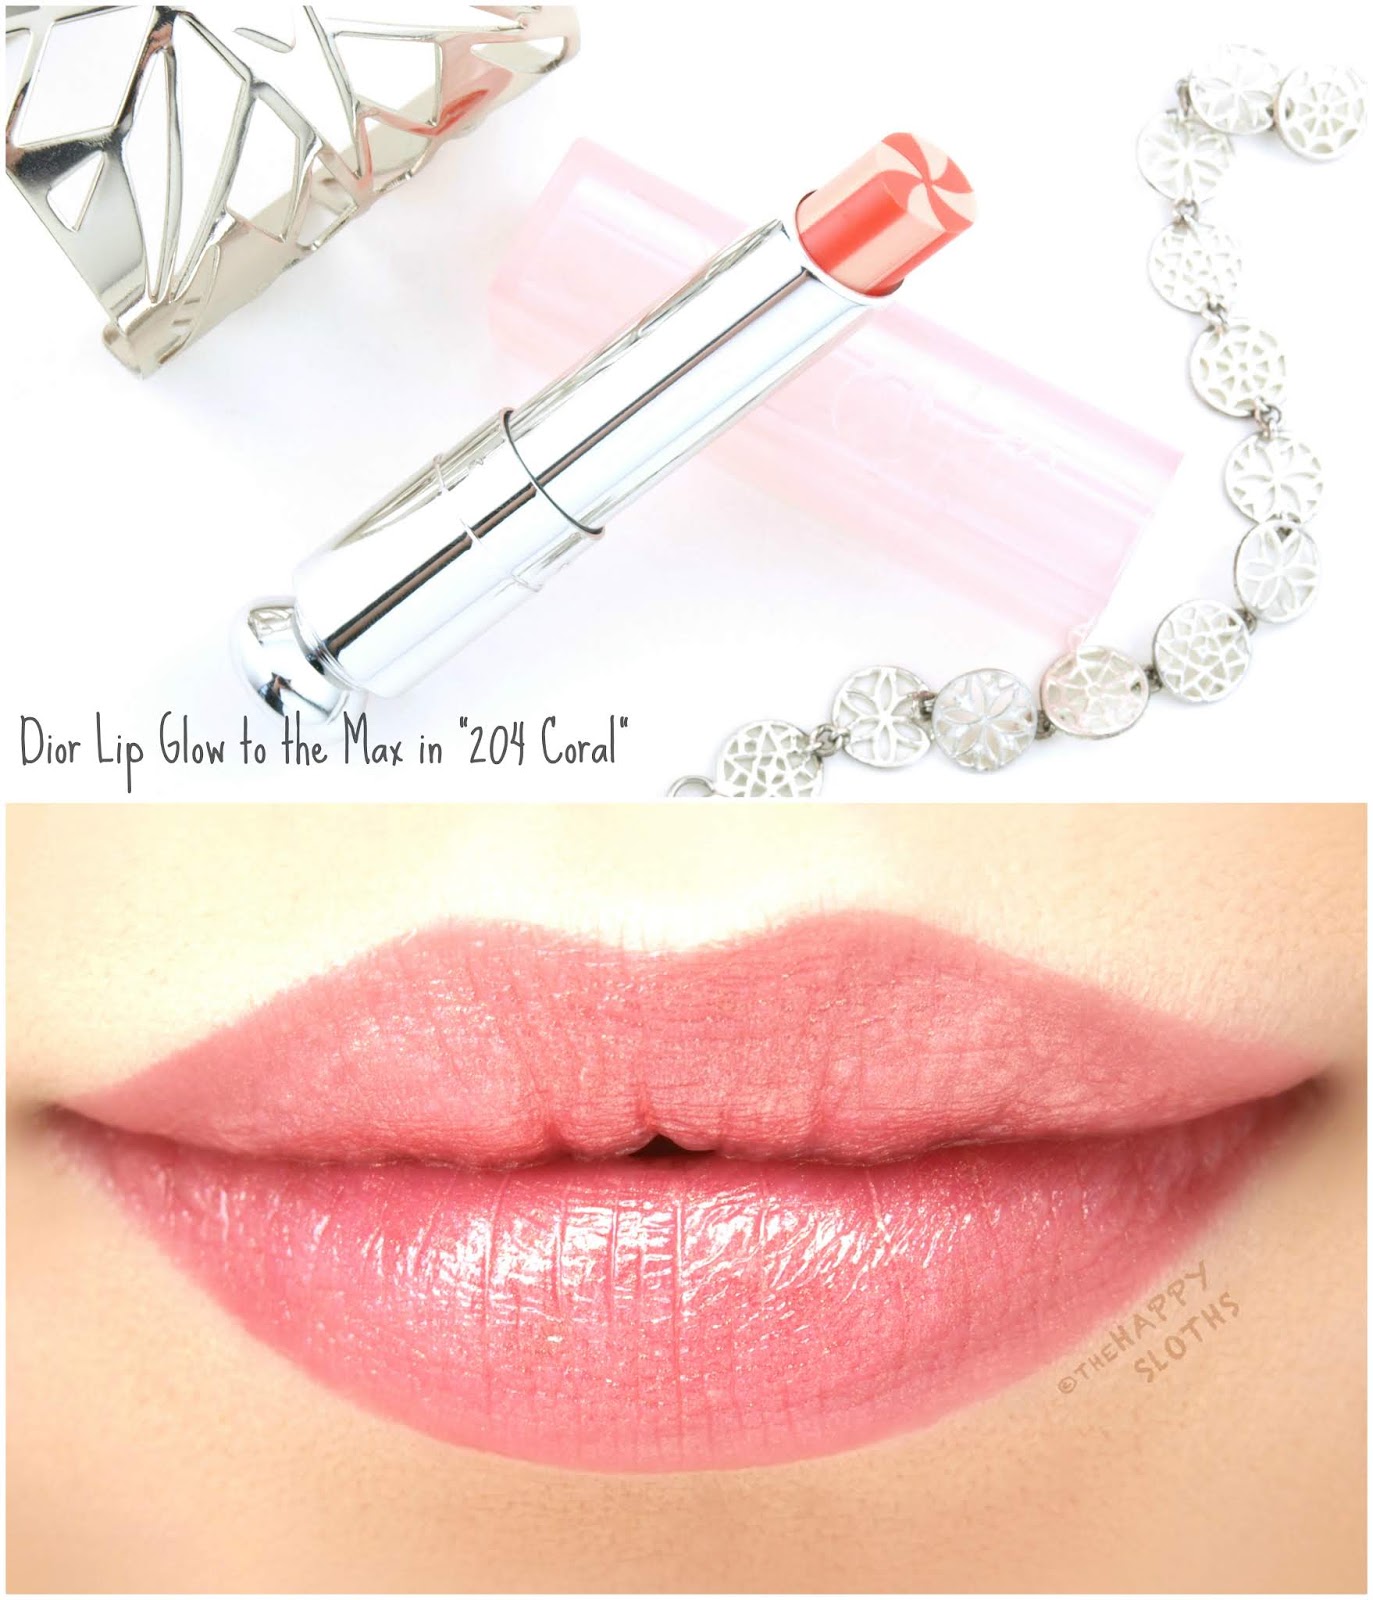 dior lip glow to the max hydrating color reviver lip balm